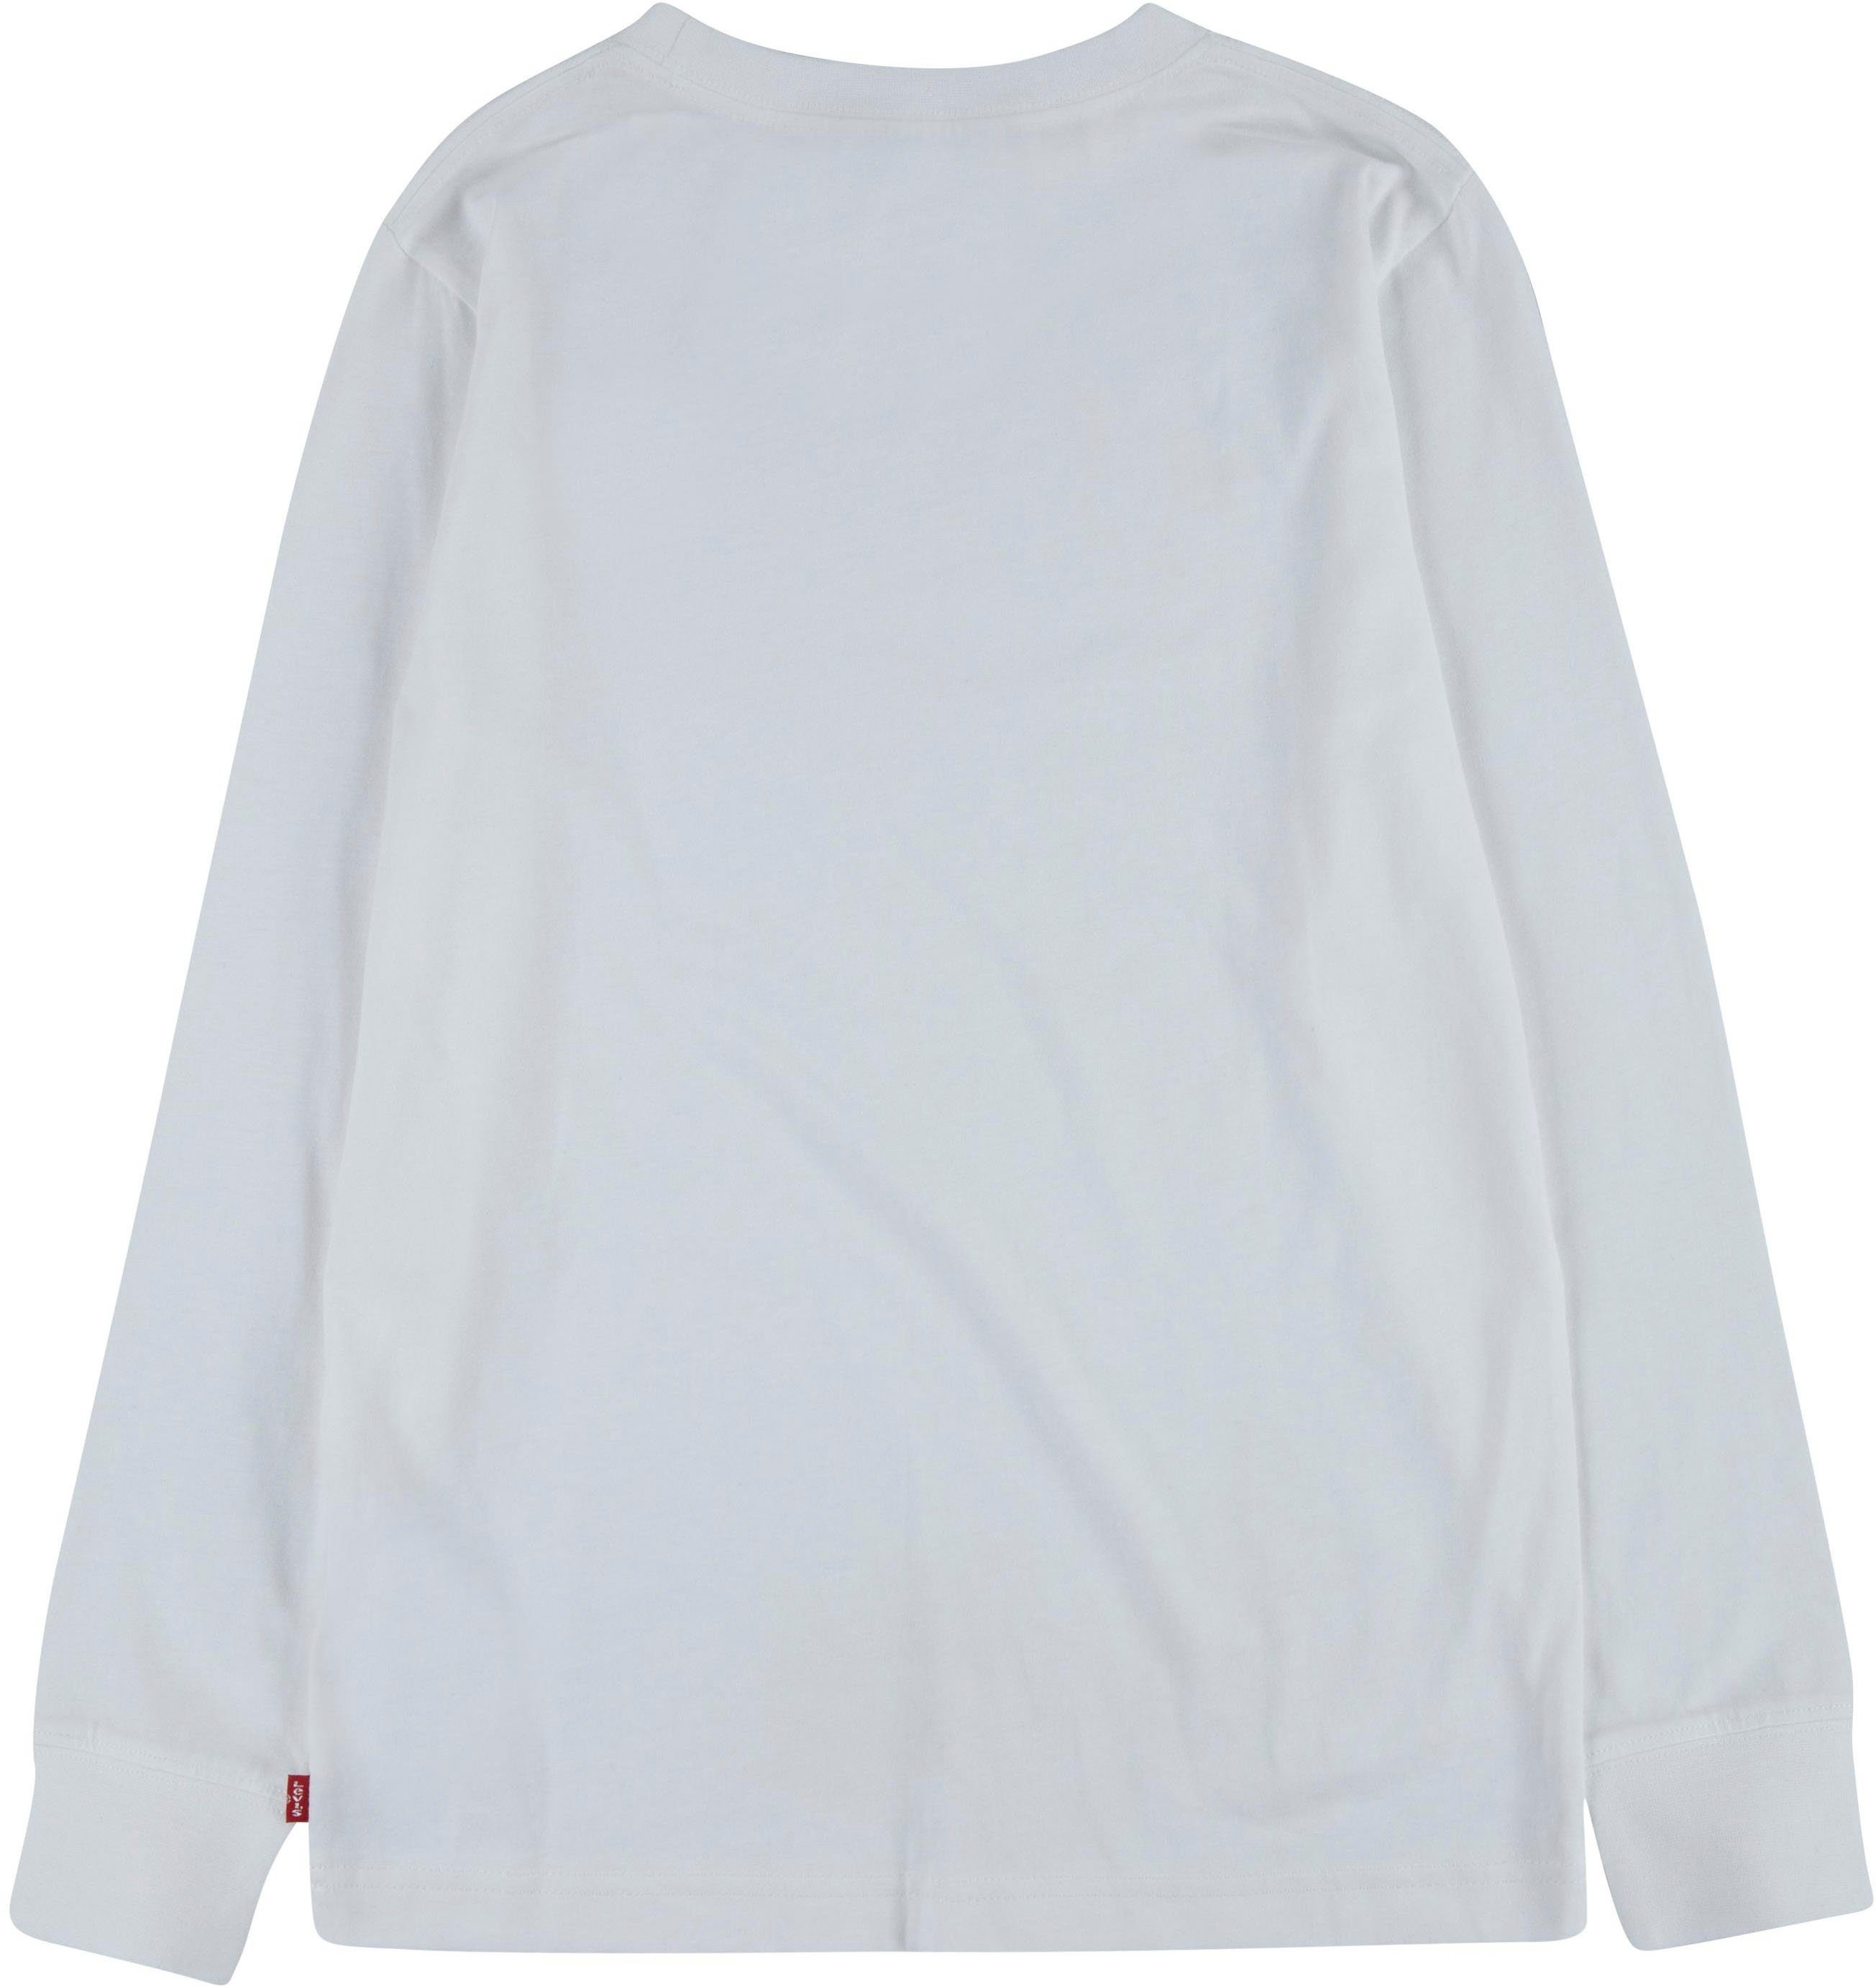 BATWING for TEE weiß Kids Levi's® Langarmshirt L/S BOYS CHESTHIT